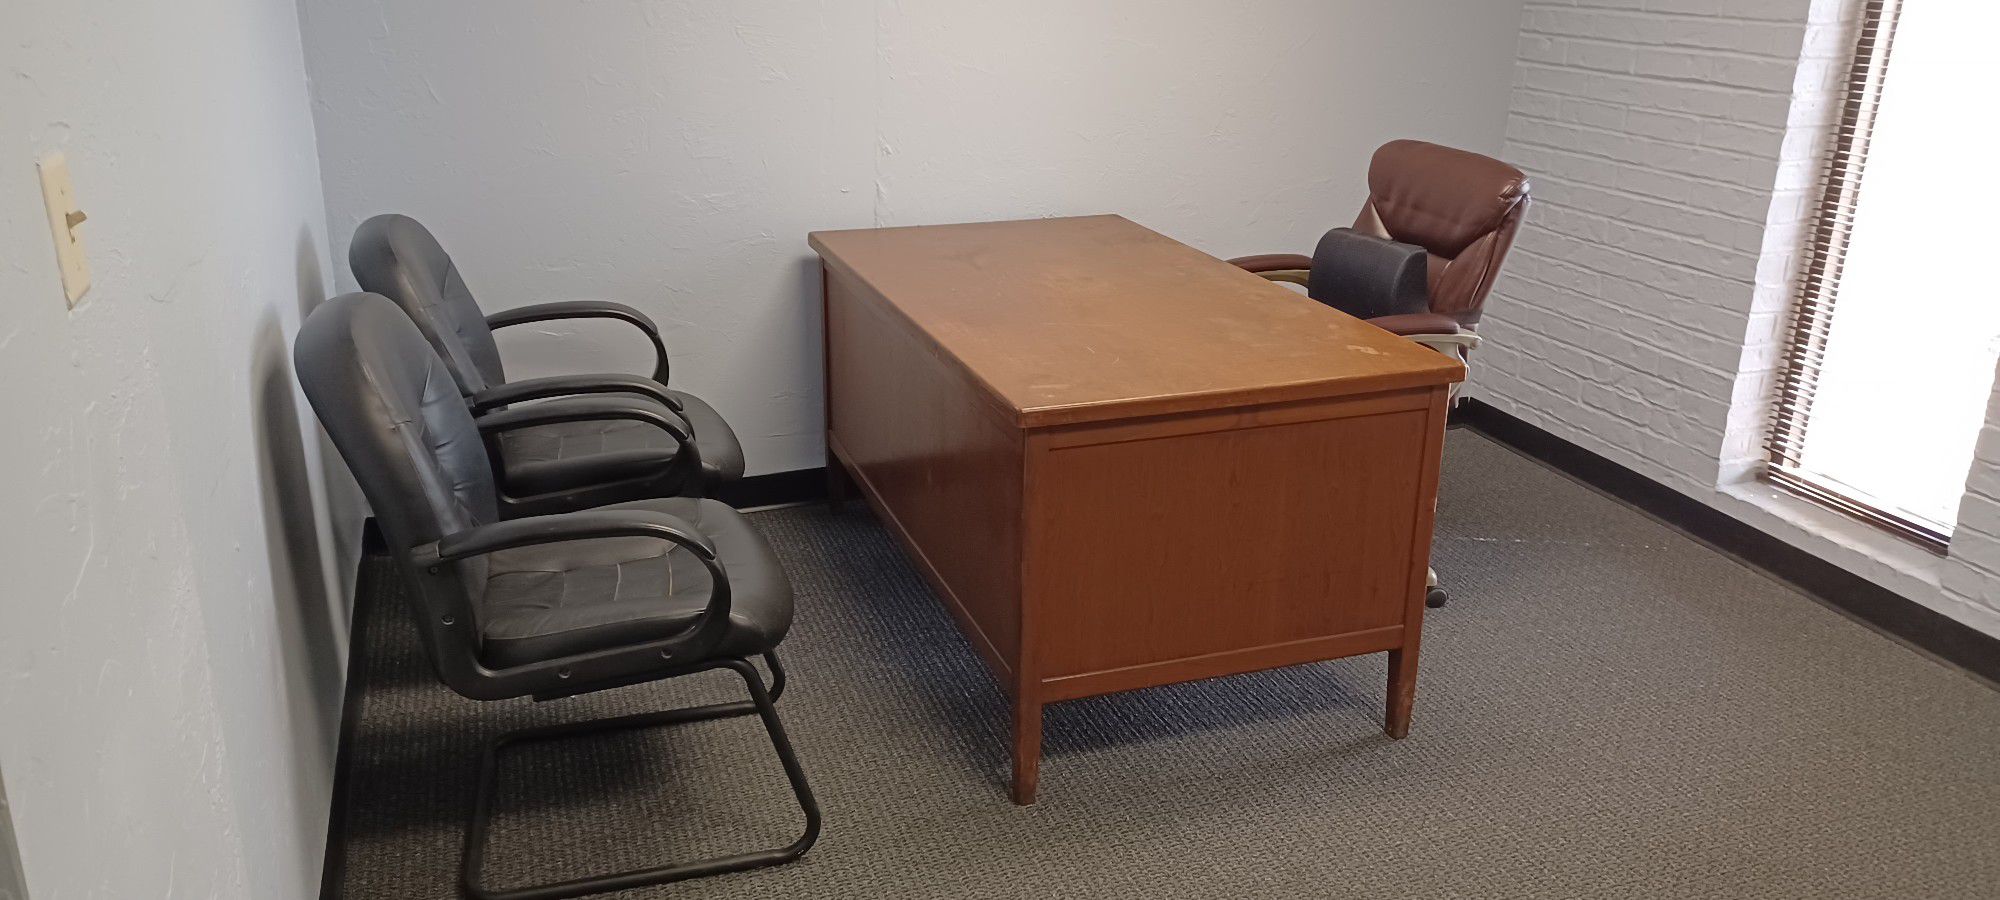 OFFICE DESK AND LEATHER CHAIRS